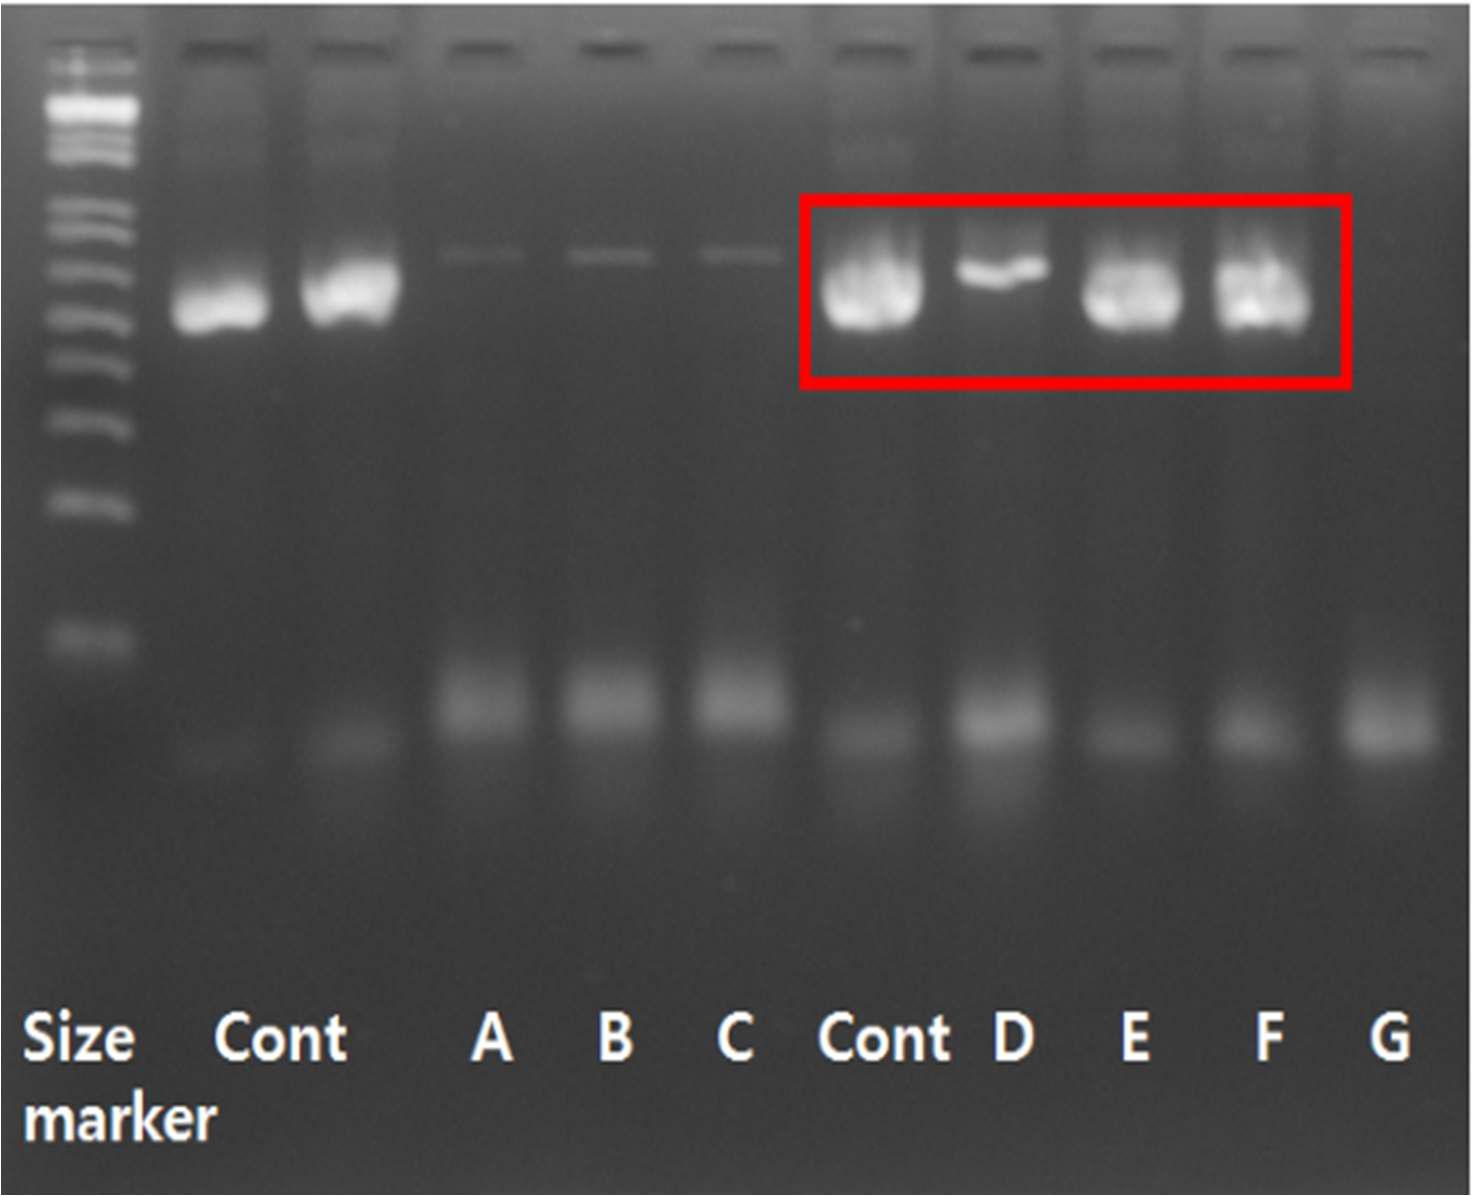 PCR test of Salmonella spp. in the liquid pig manures. Salmonella spp. was detected in the one sample among the surveyed commercial liquid pig manures